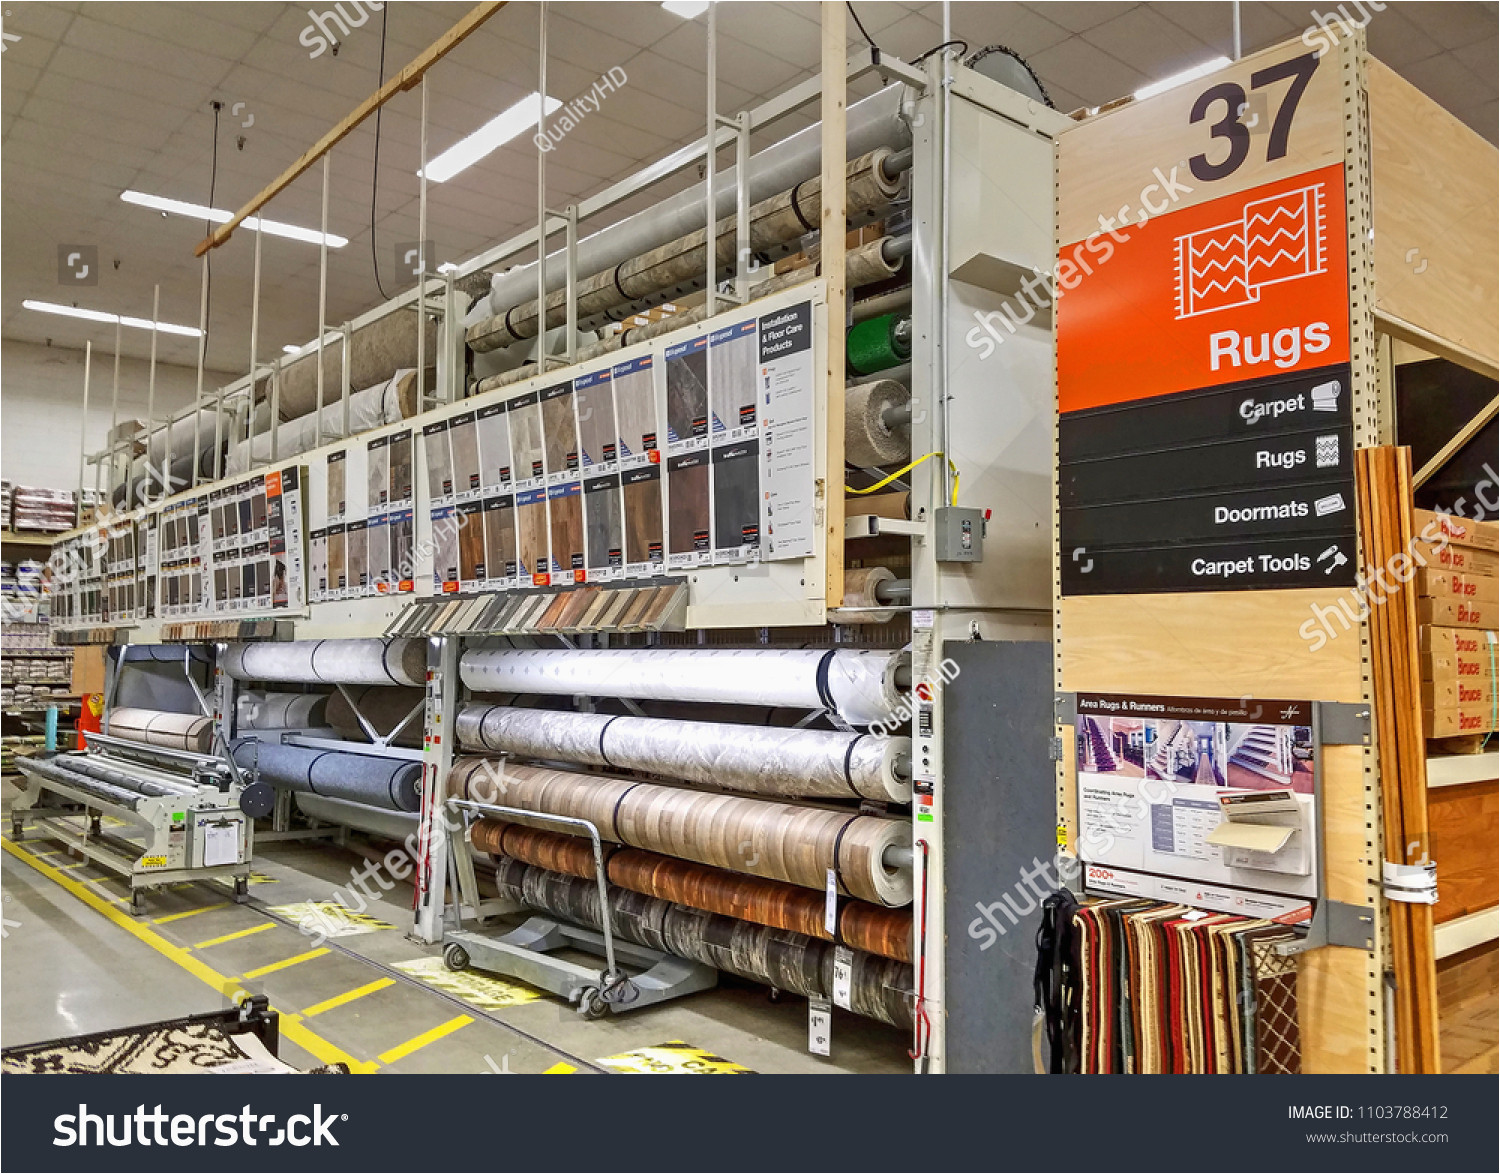 Home Depot In Store area Rugs Home Depot Retail Store Carpet Rugs Stock Photo 1103788412 …